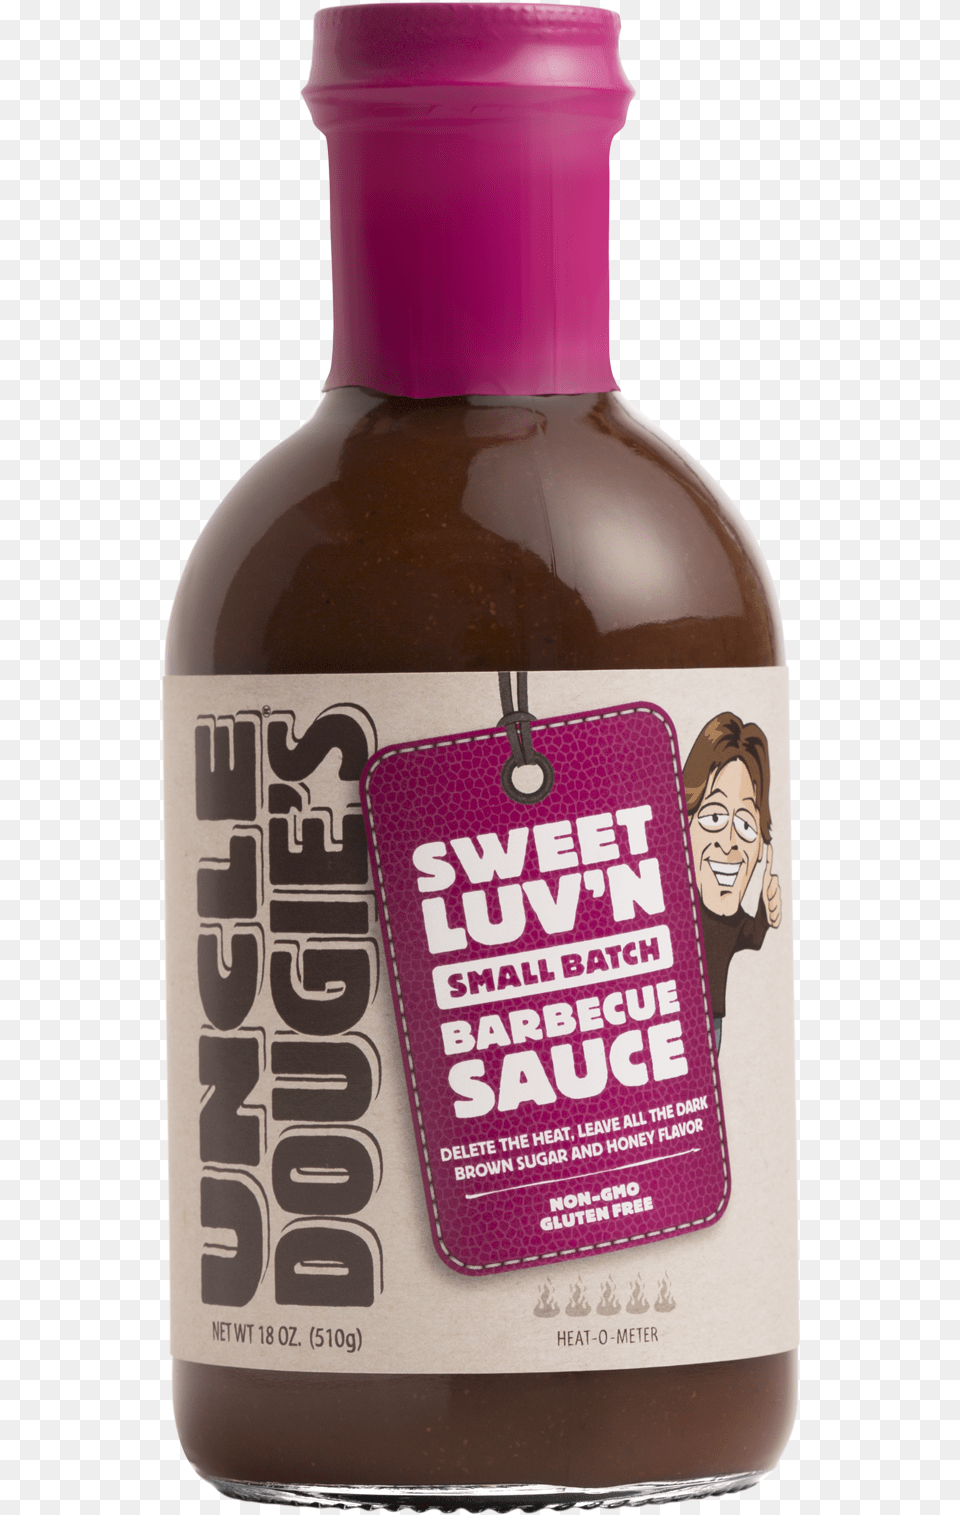 Sweet Luv N Small Batch Barbecue Sauce Glass Bottle, Lotion, Person, Face, Head Png